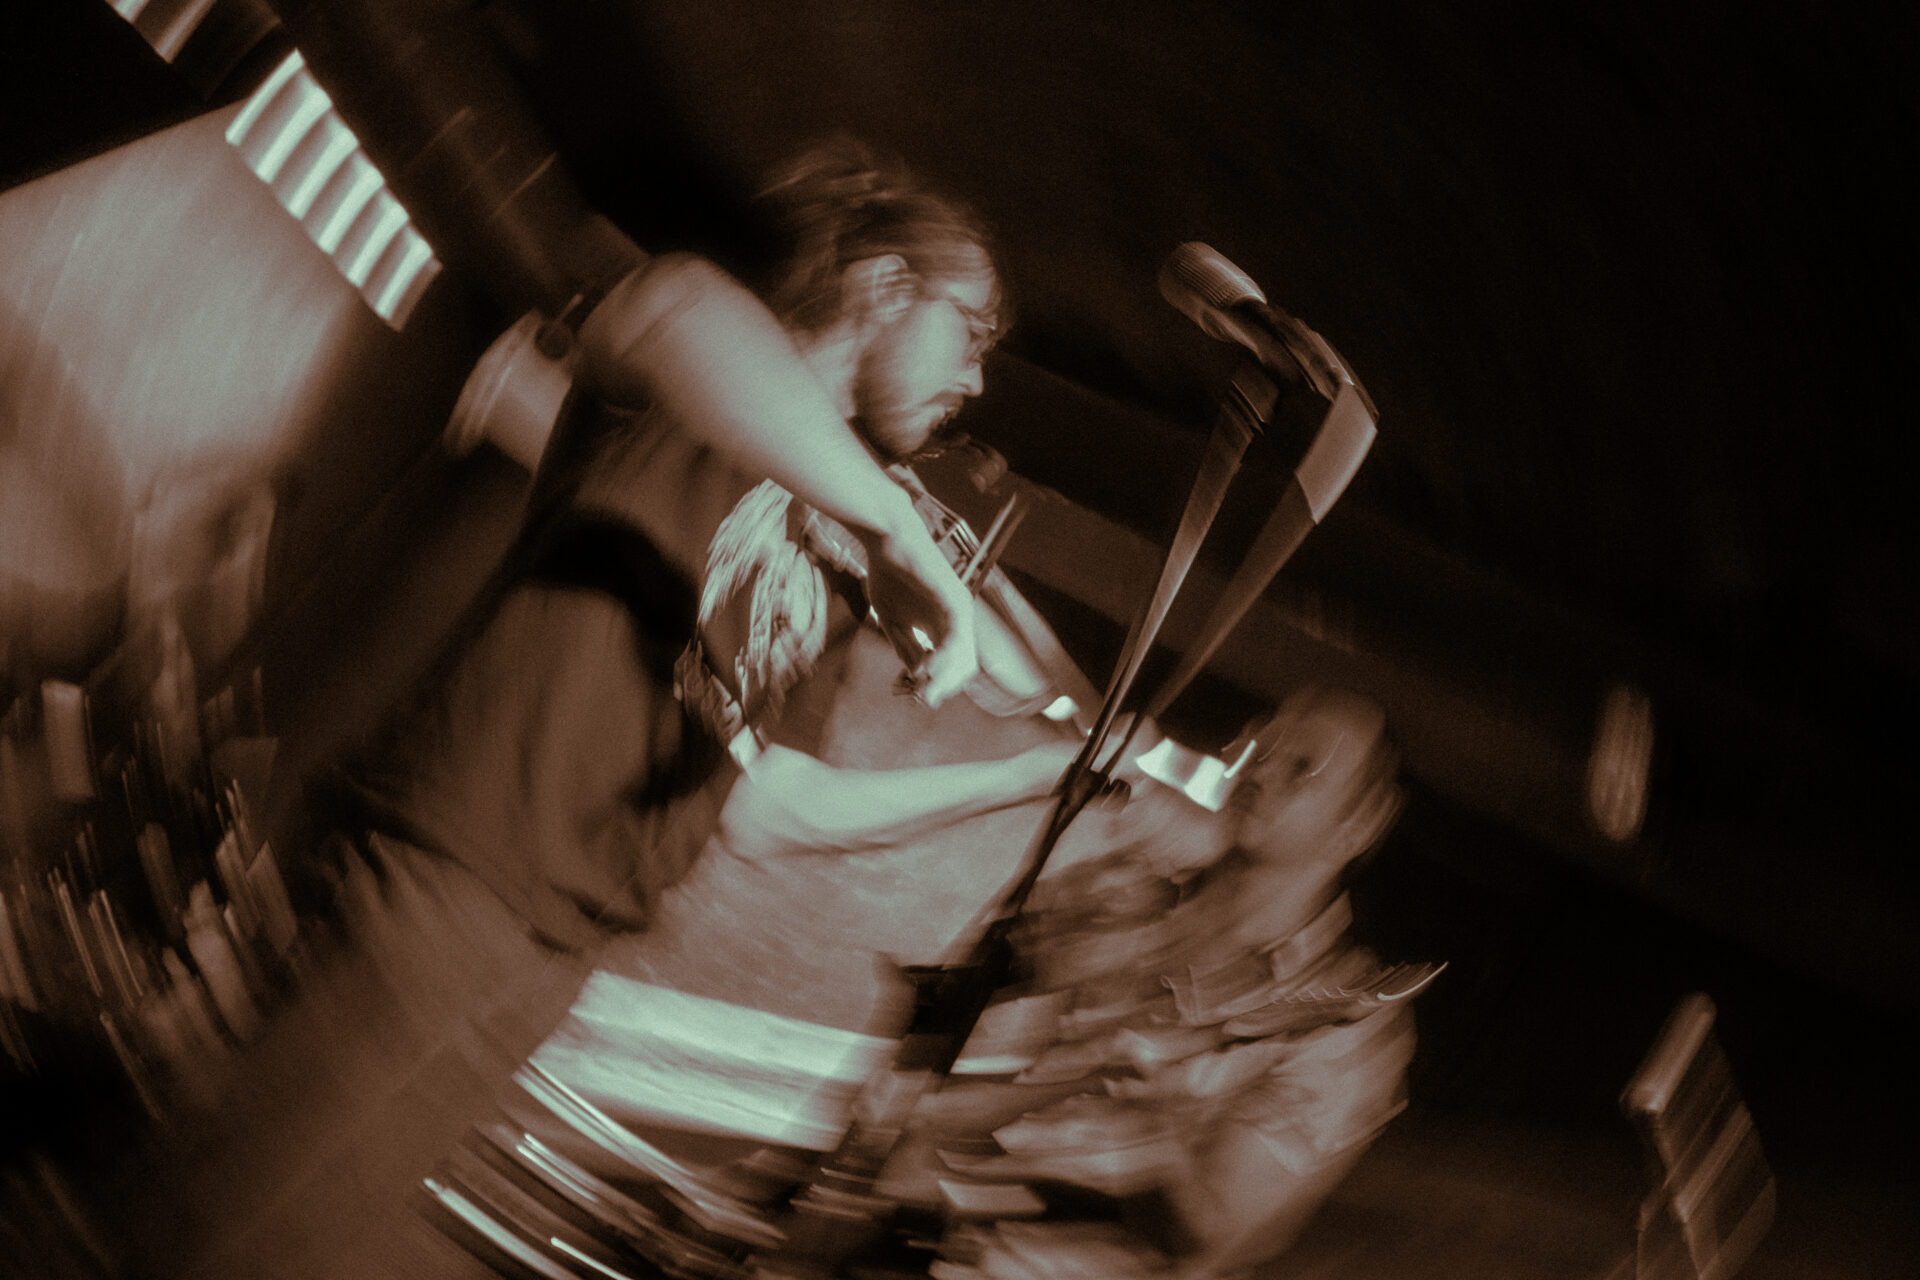 A blurry photograph of a man playing violinl.